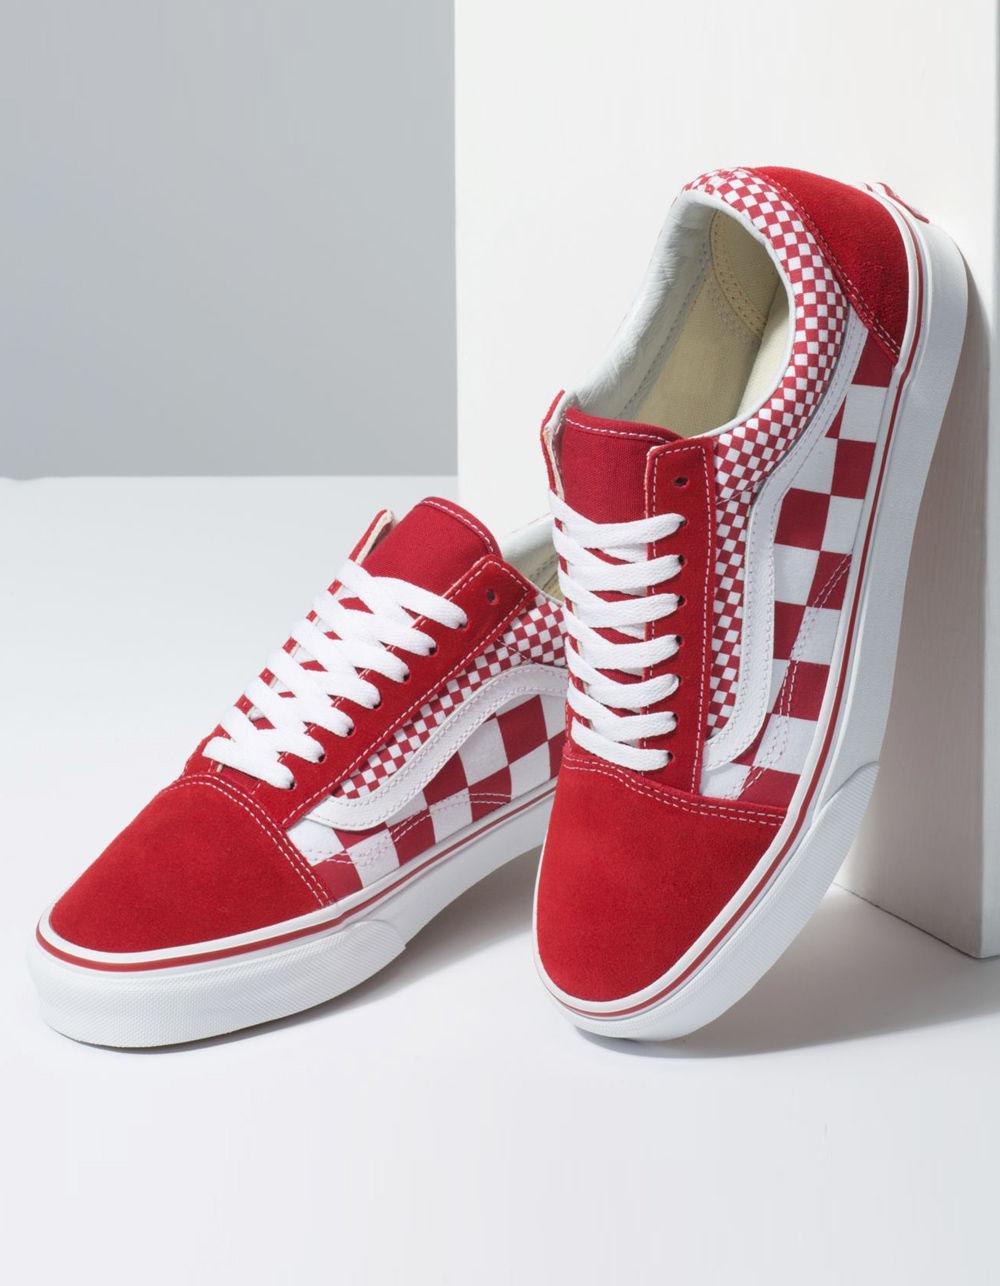 Vans Rubber Red Mix Checker Old Skool Shoes for Men - Lyst